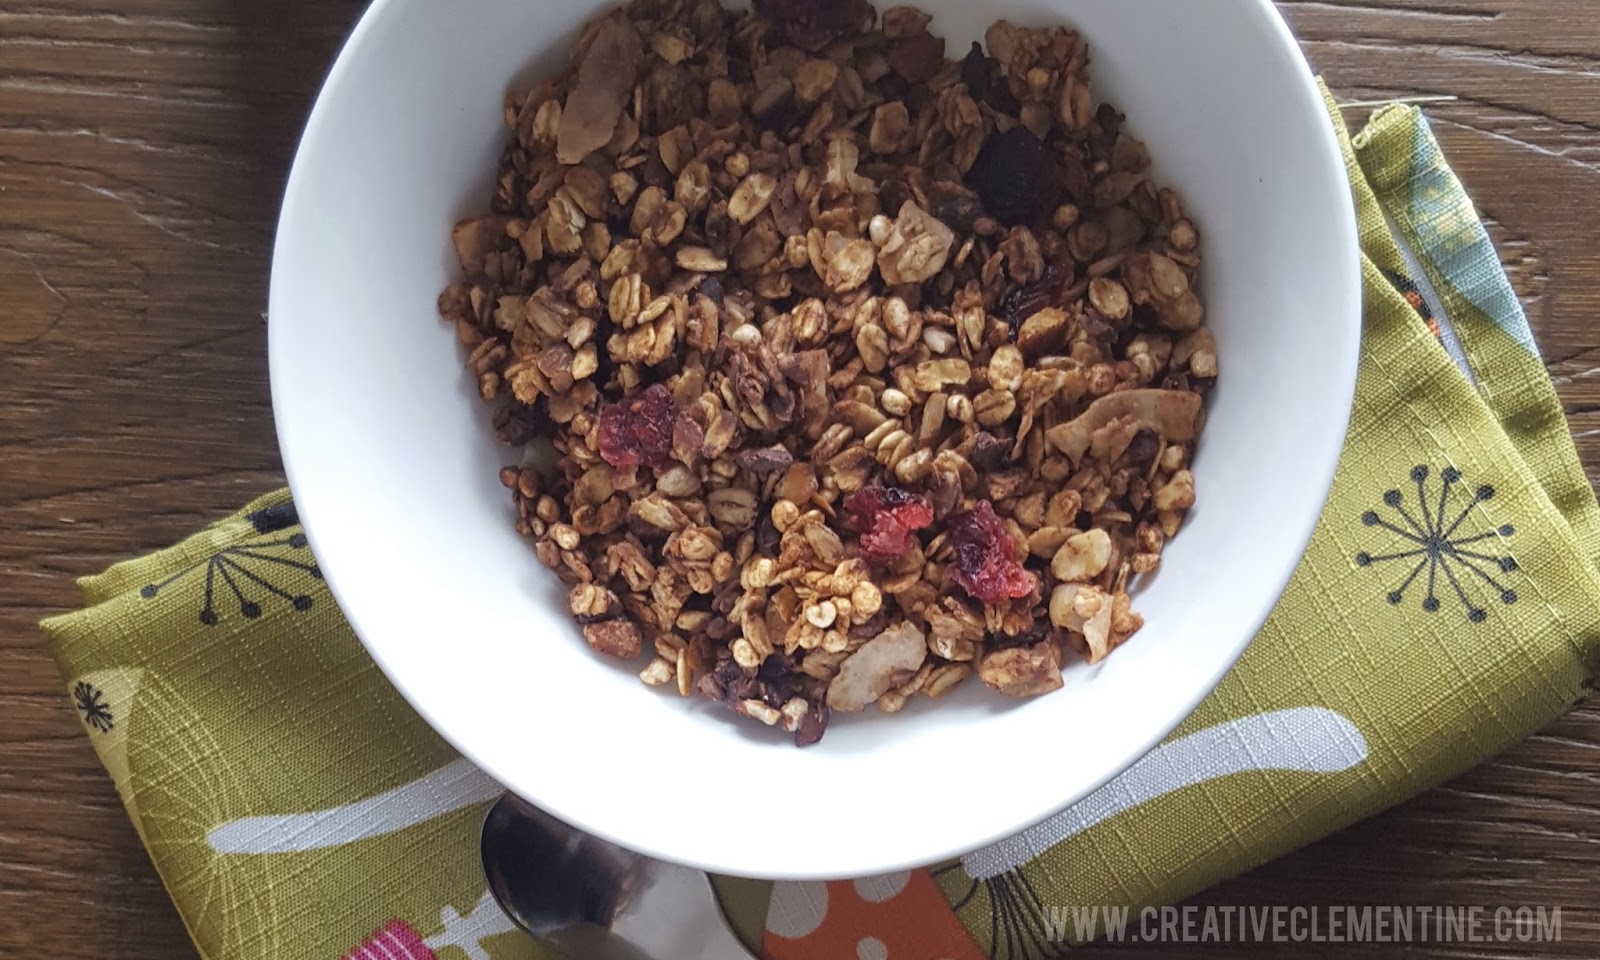 Recipe for Chocolate Chai Granola with Cranberries on www.creativeclementine.com